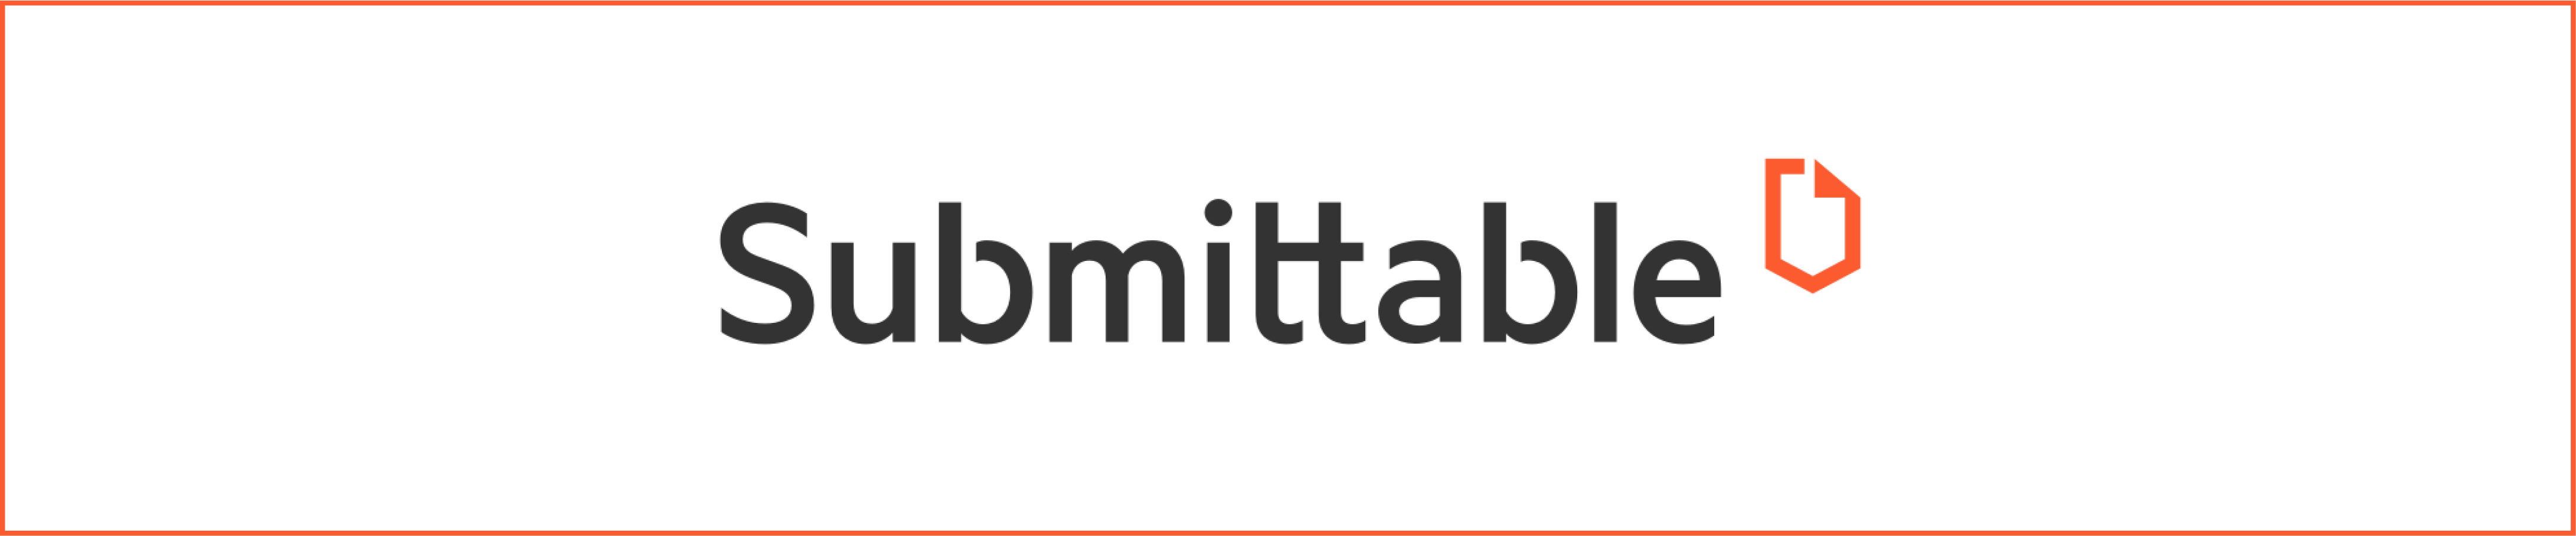 Submittable-header